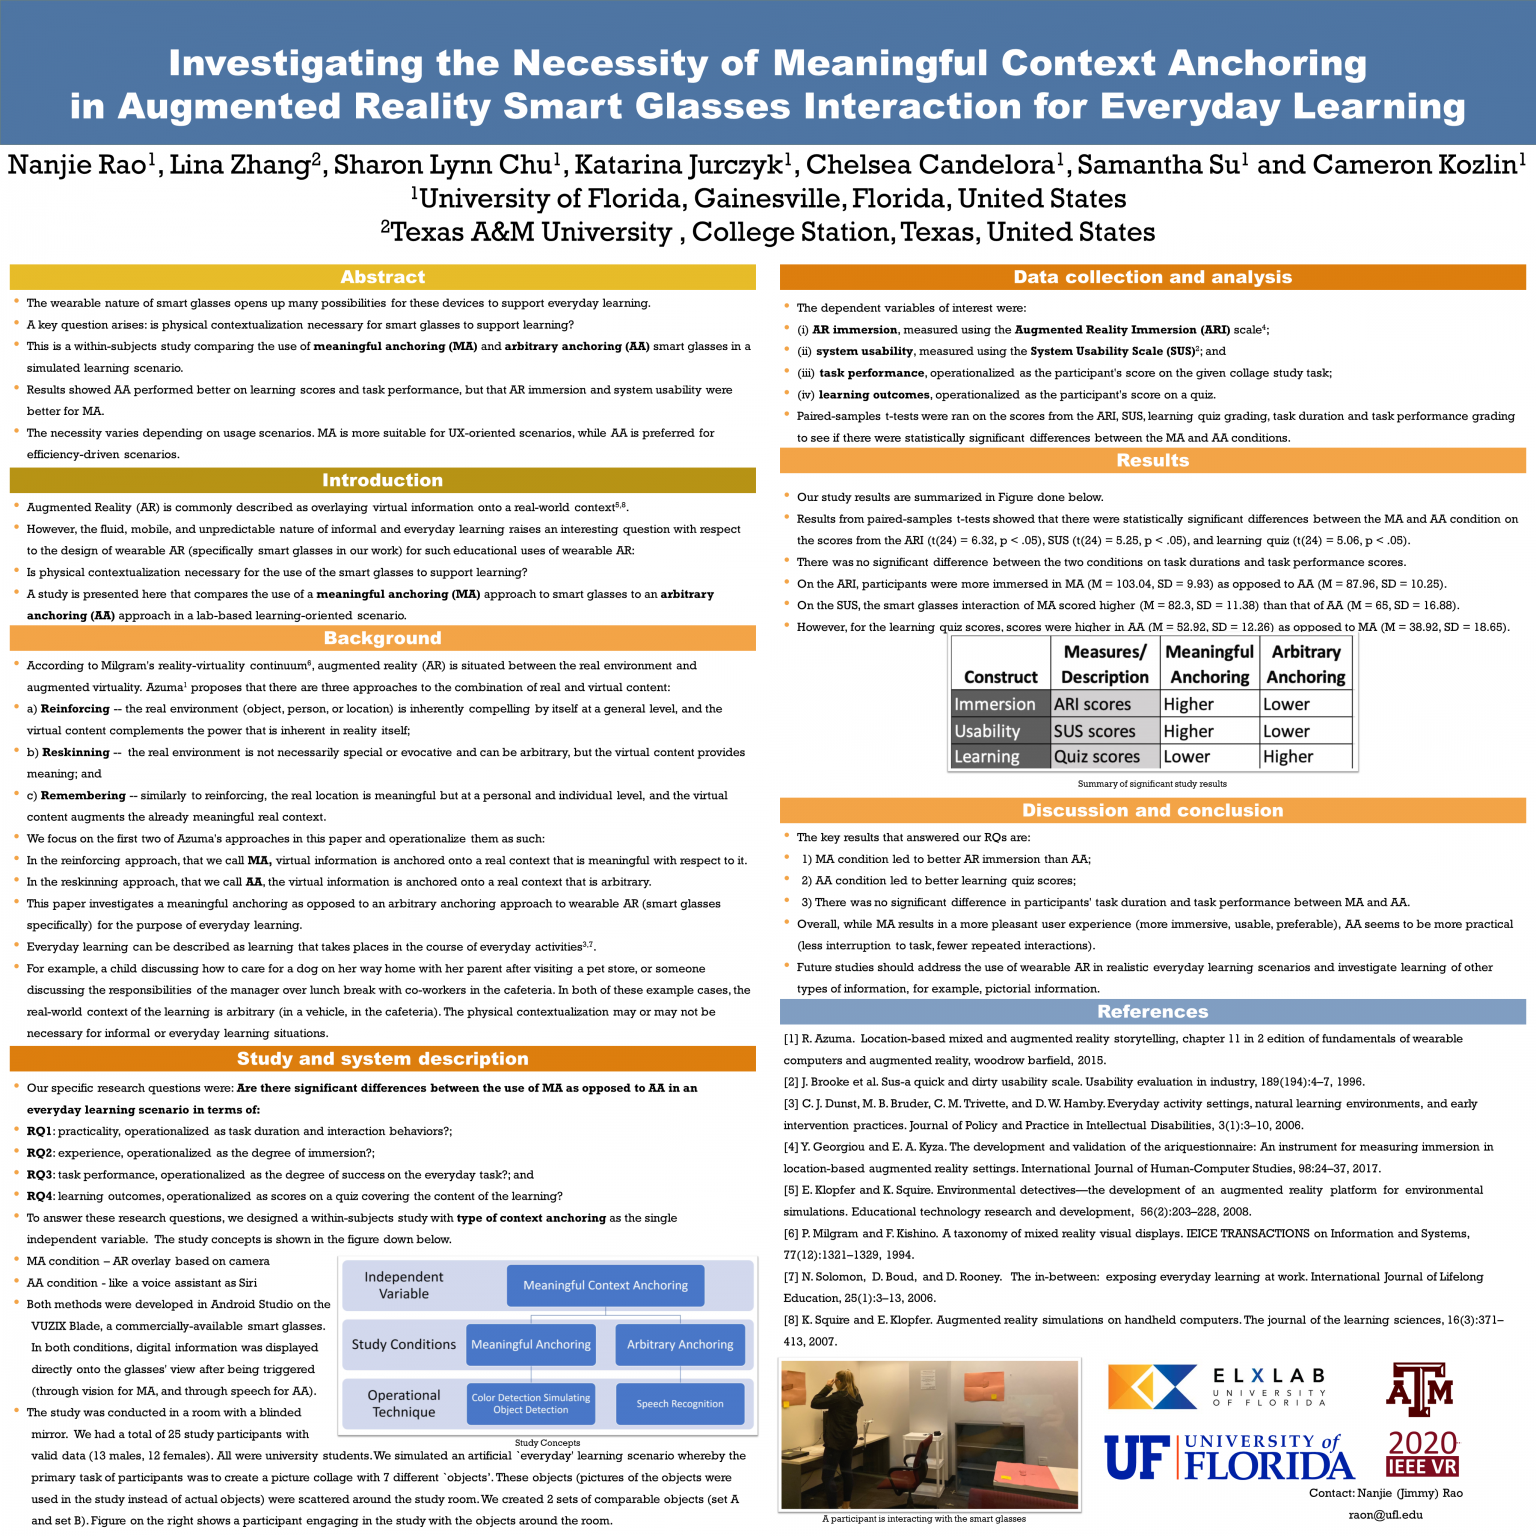 IEEE VR Poster Presentation….. in VR! The Embodied Learning